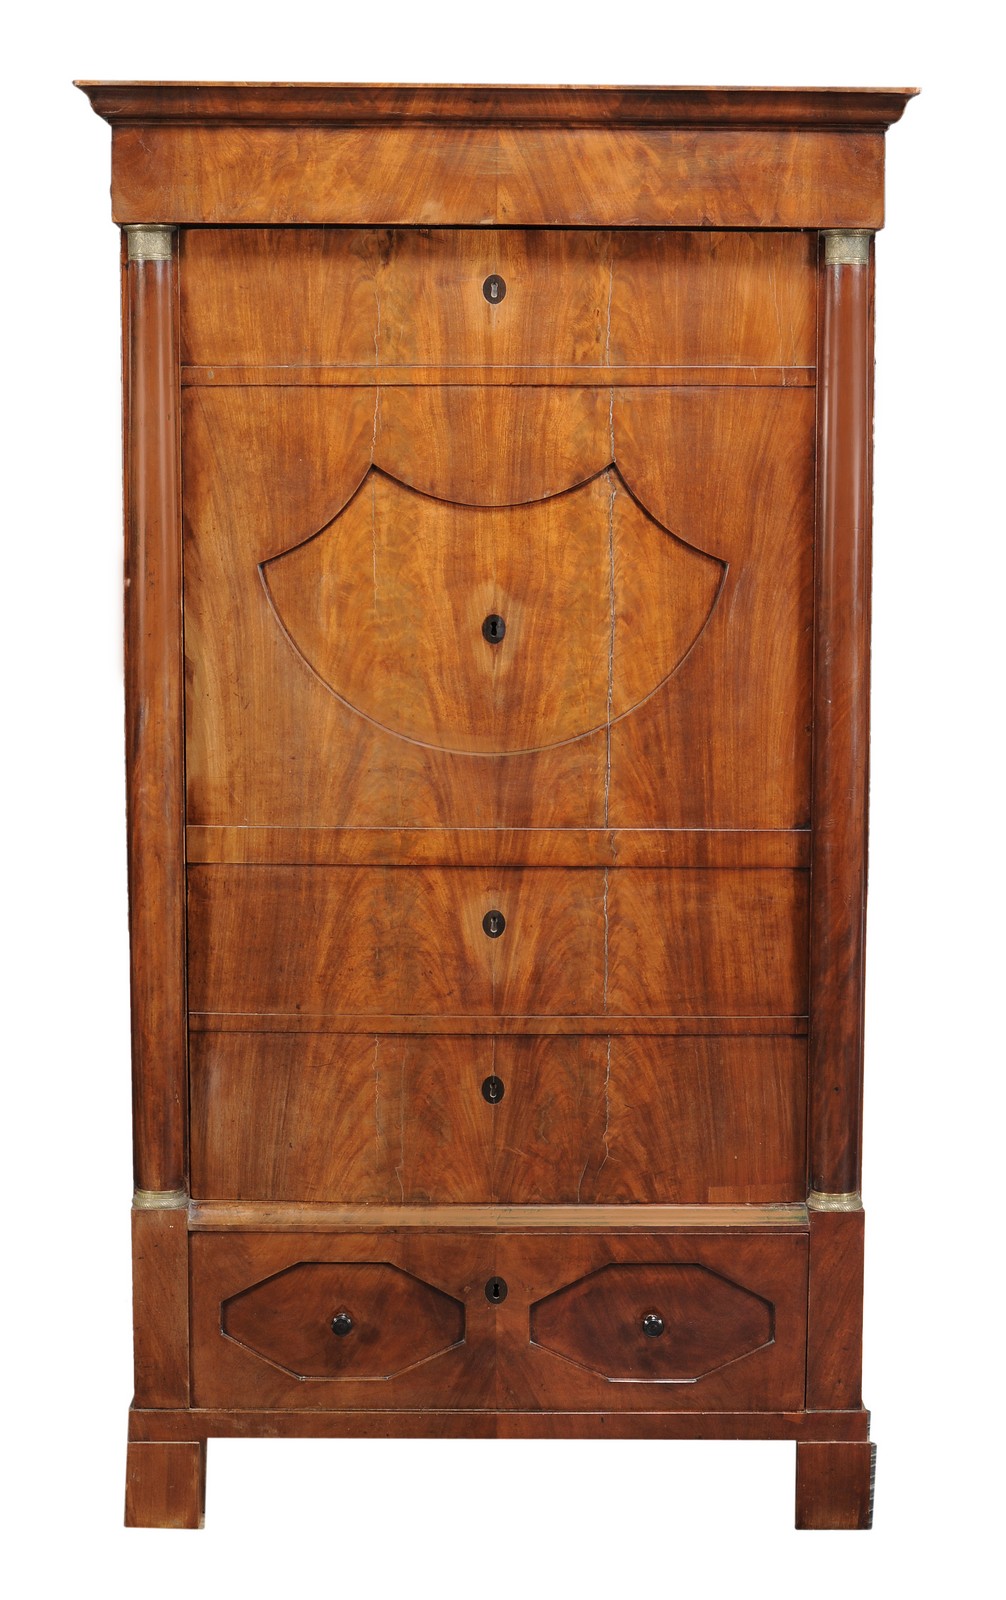 A Louis Philippe mahogany and ormolu mounted wardrobe, circa 1840, modelled as a secretaire with a